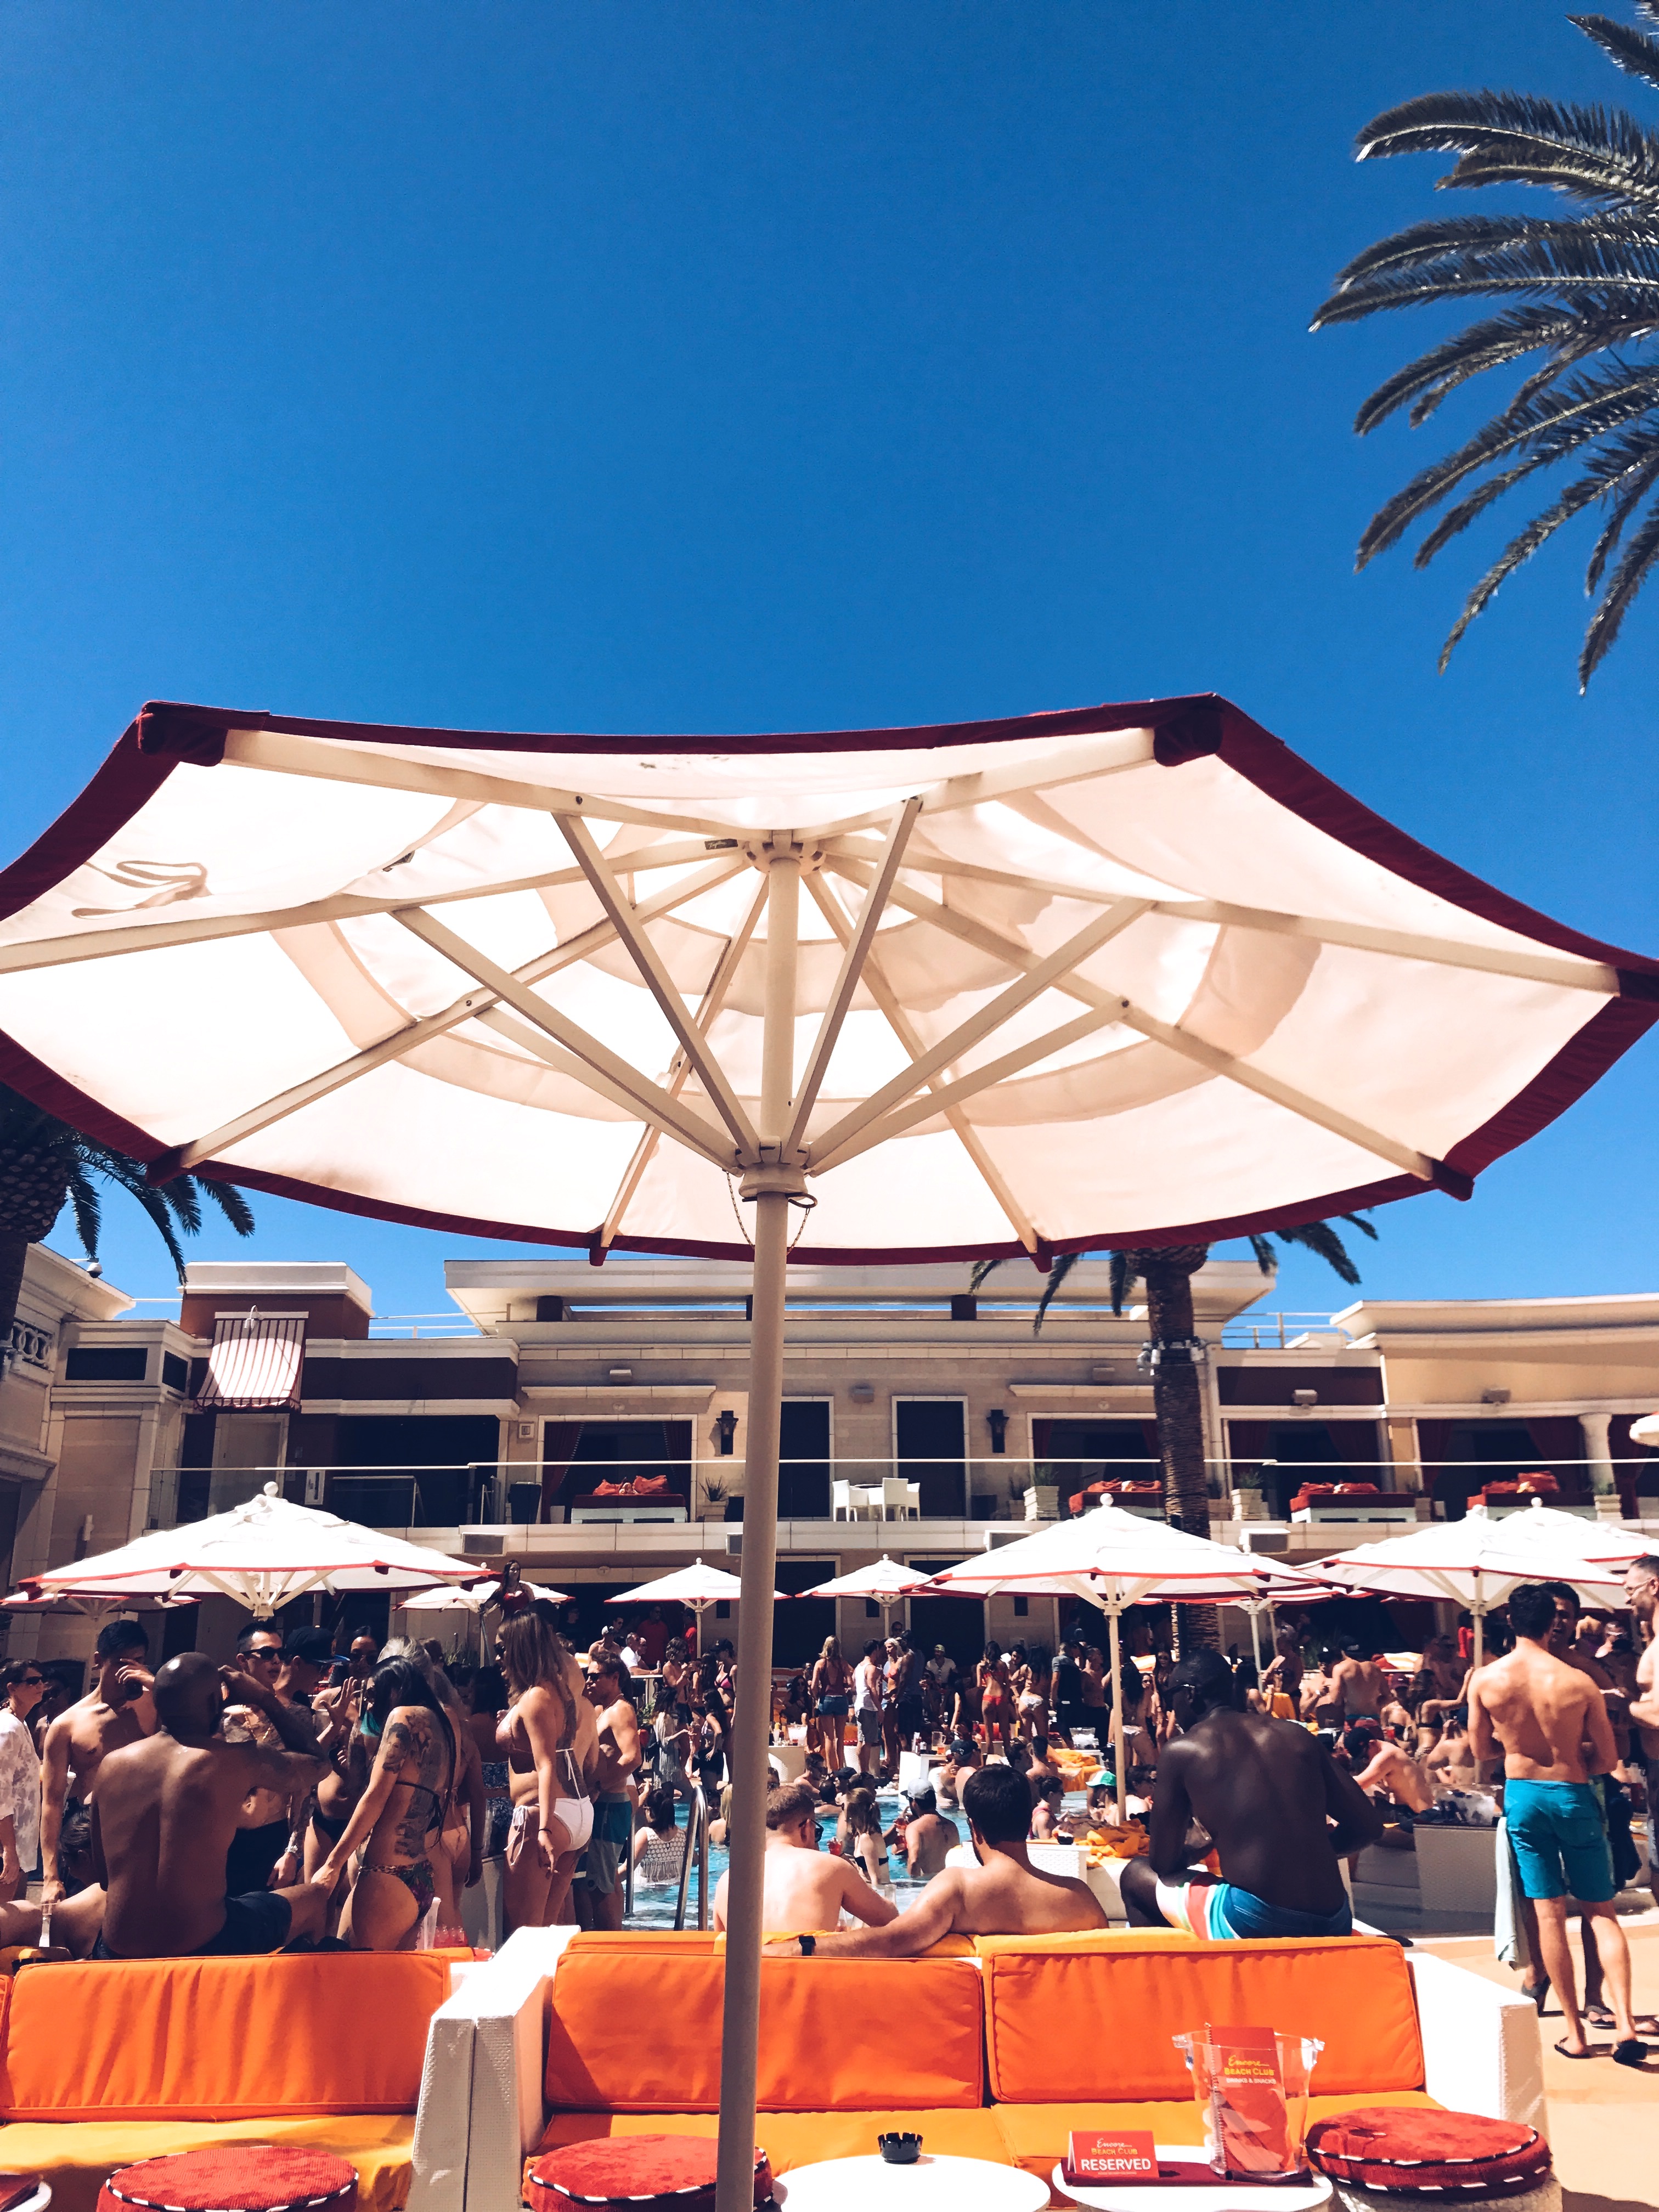 Las Vegas Pool Parties You'll Fall In Love With by Holiday Genie